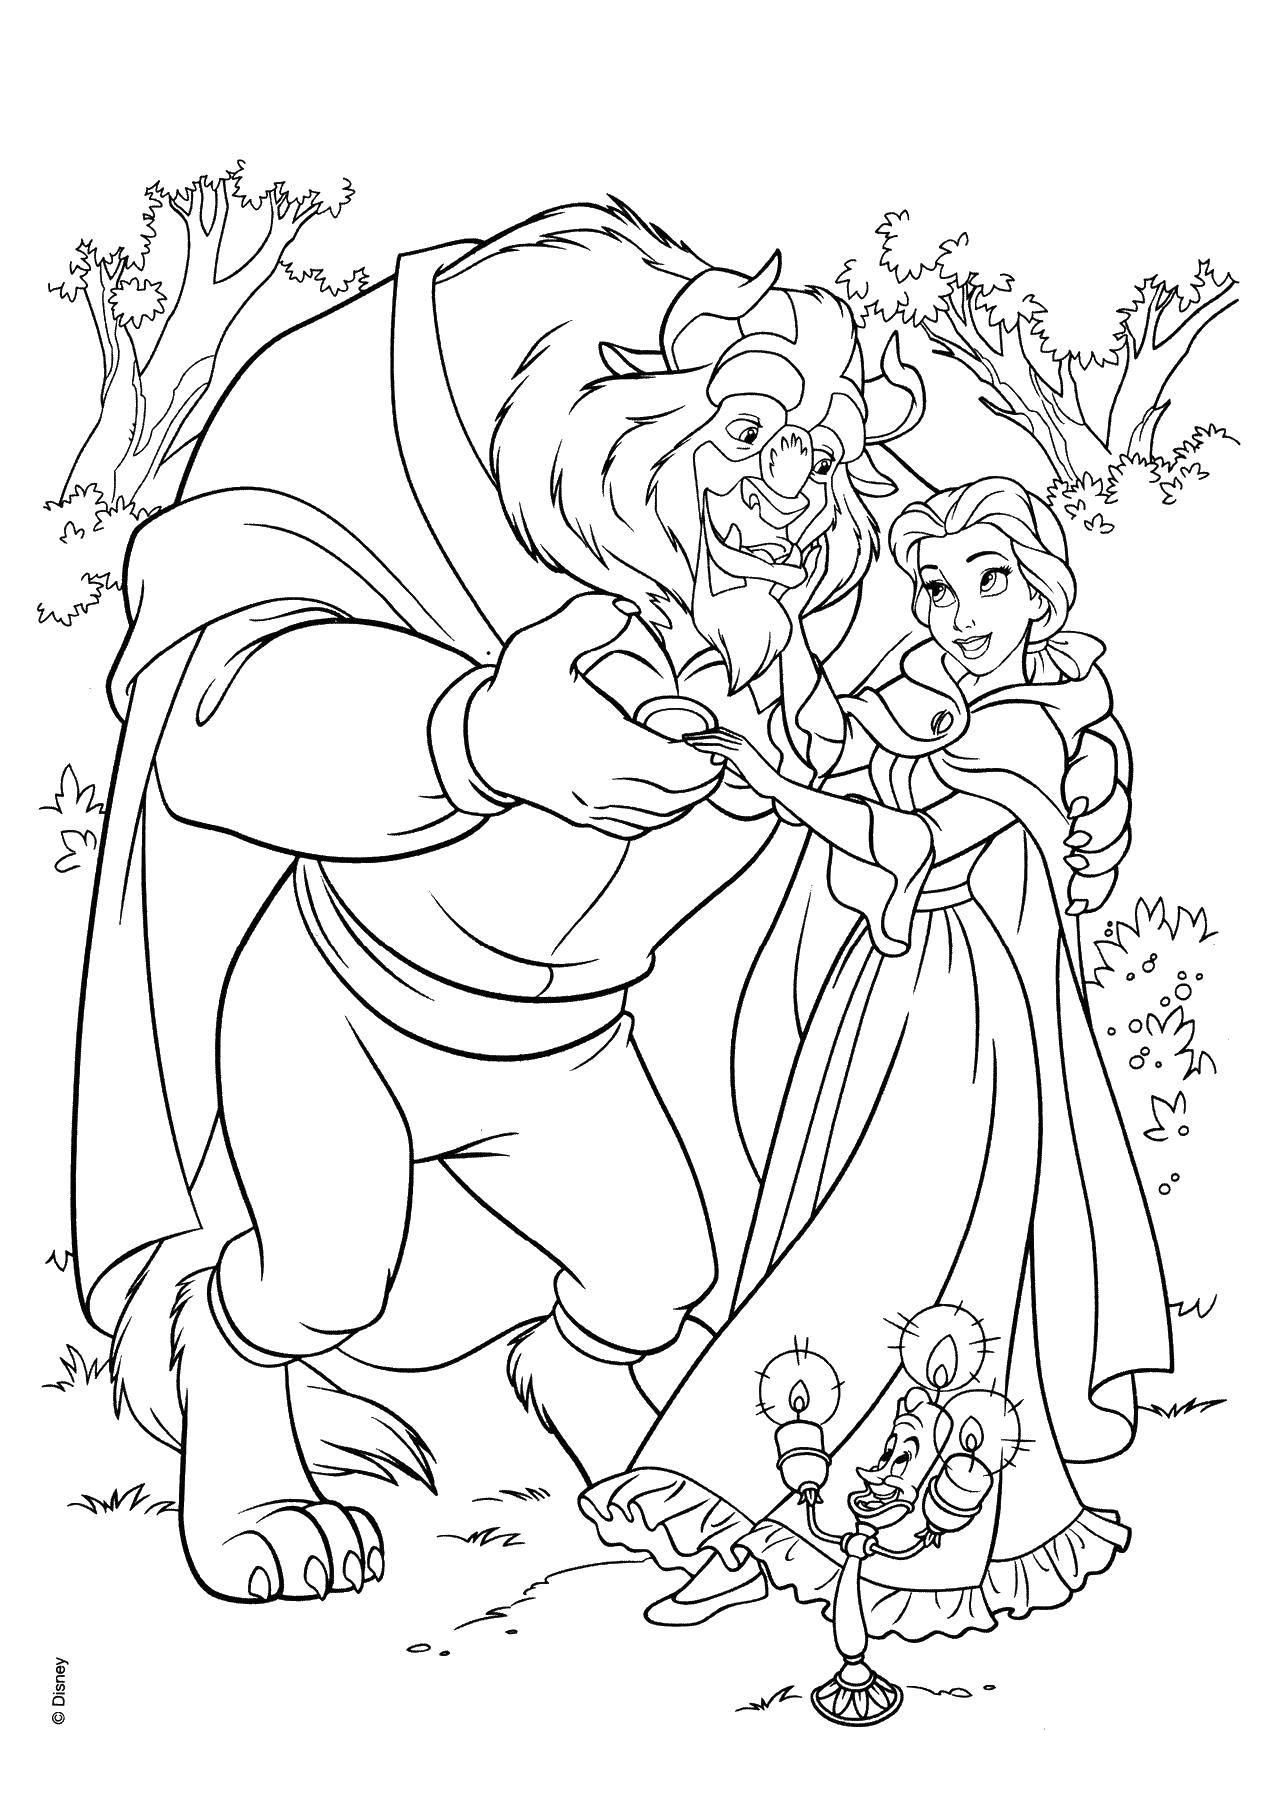 Coloring Beauty and the beast. Category Disney coloring pages. Tags:  Disney, "beauty and the beast".